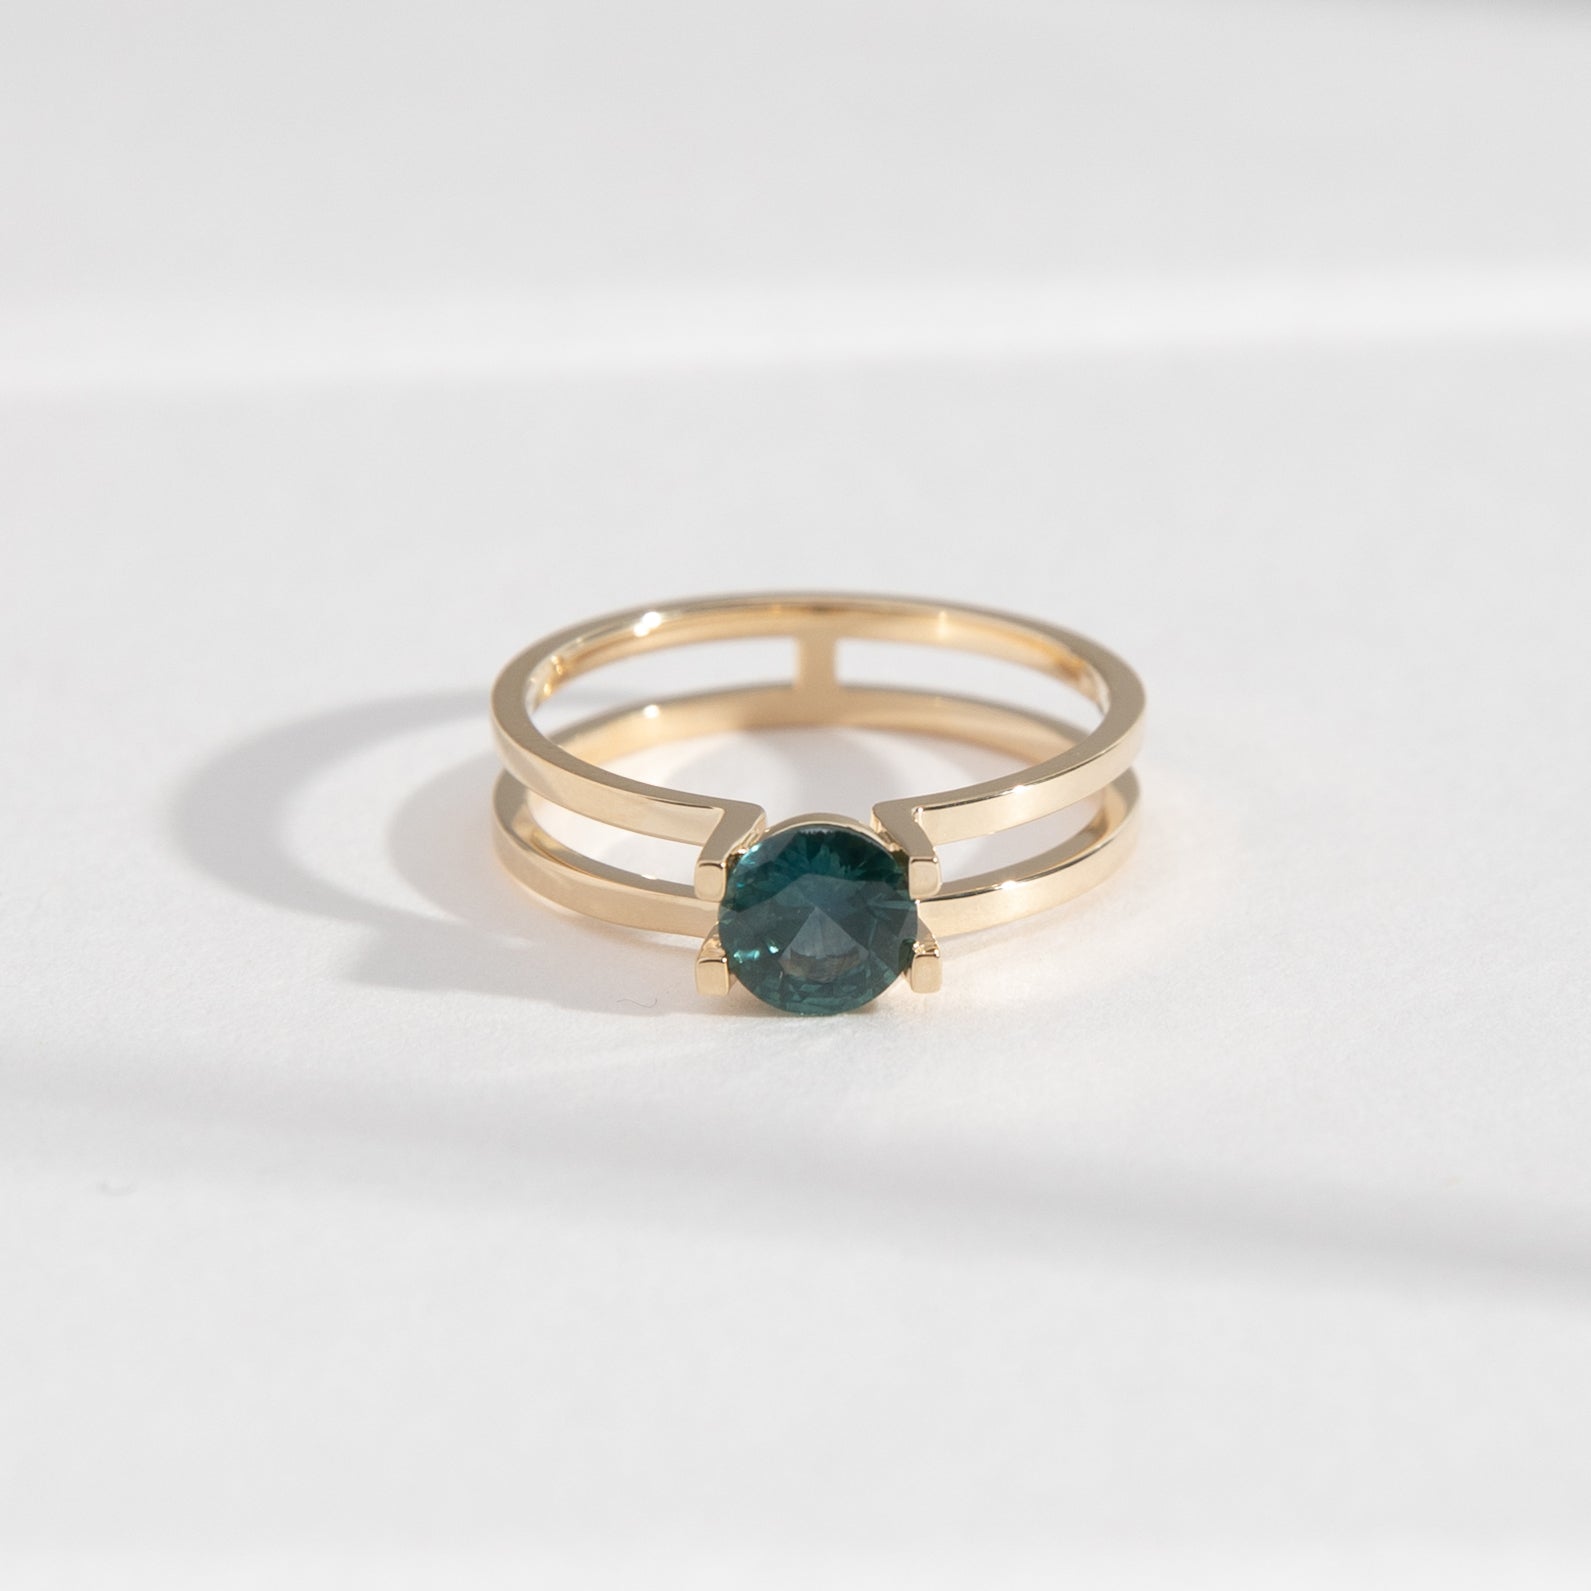 Cara Unique Ring in 14k Gold set with a 0.68ct dark teal round brilliant cut sapphire By SHW Fine Jewelry New York City